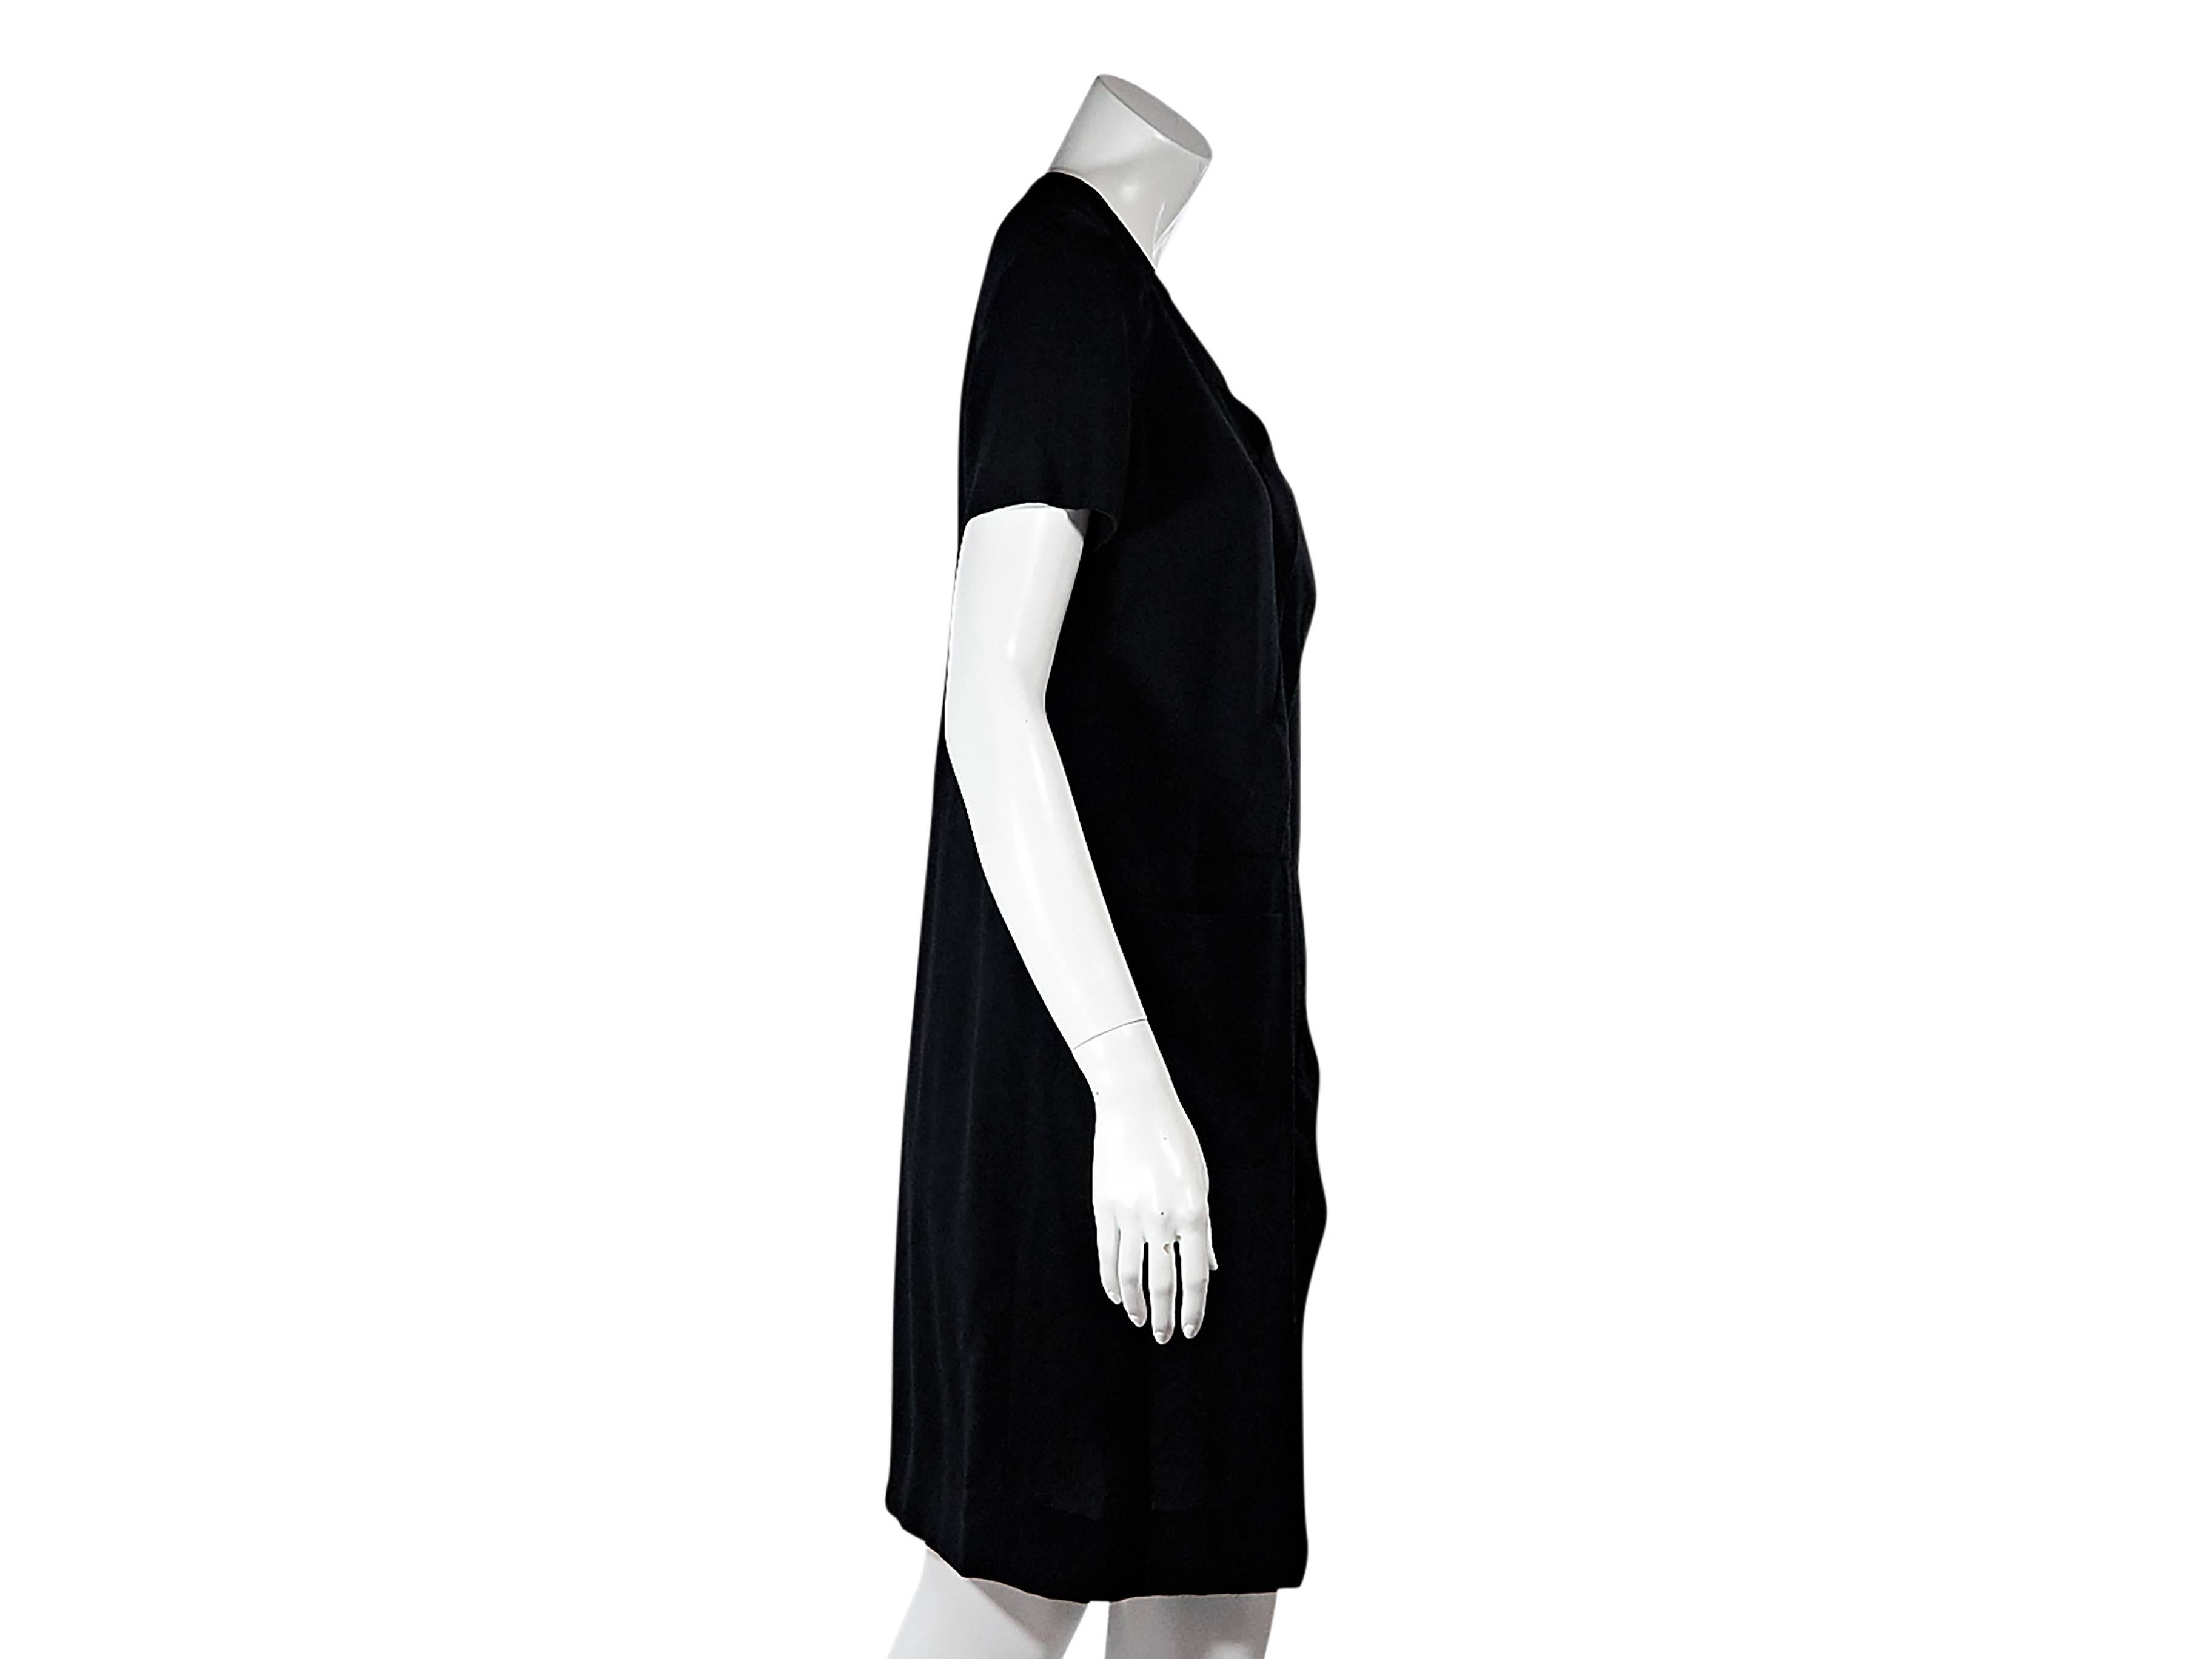 Product details:  Vintage black shift dress by Chanel.  V-neck.  Short sleeves.  Buttons accent shoulder.  Front asymmetrical pleats.  Waist patch pocket.  Concealed back zip closure.  Label size FR 44. 
Condition: Pre-owned. Very good.

